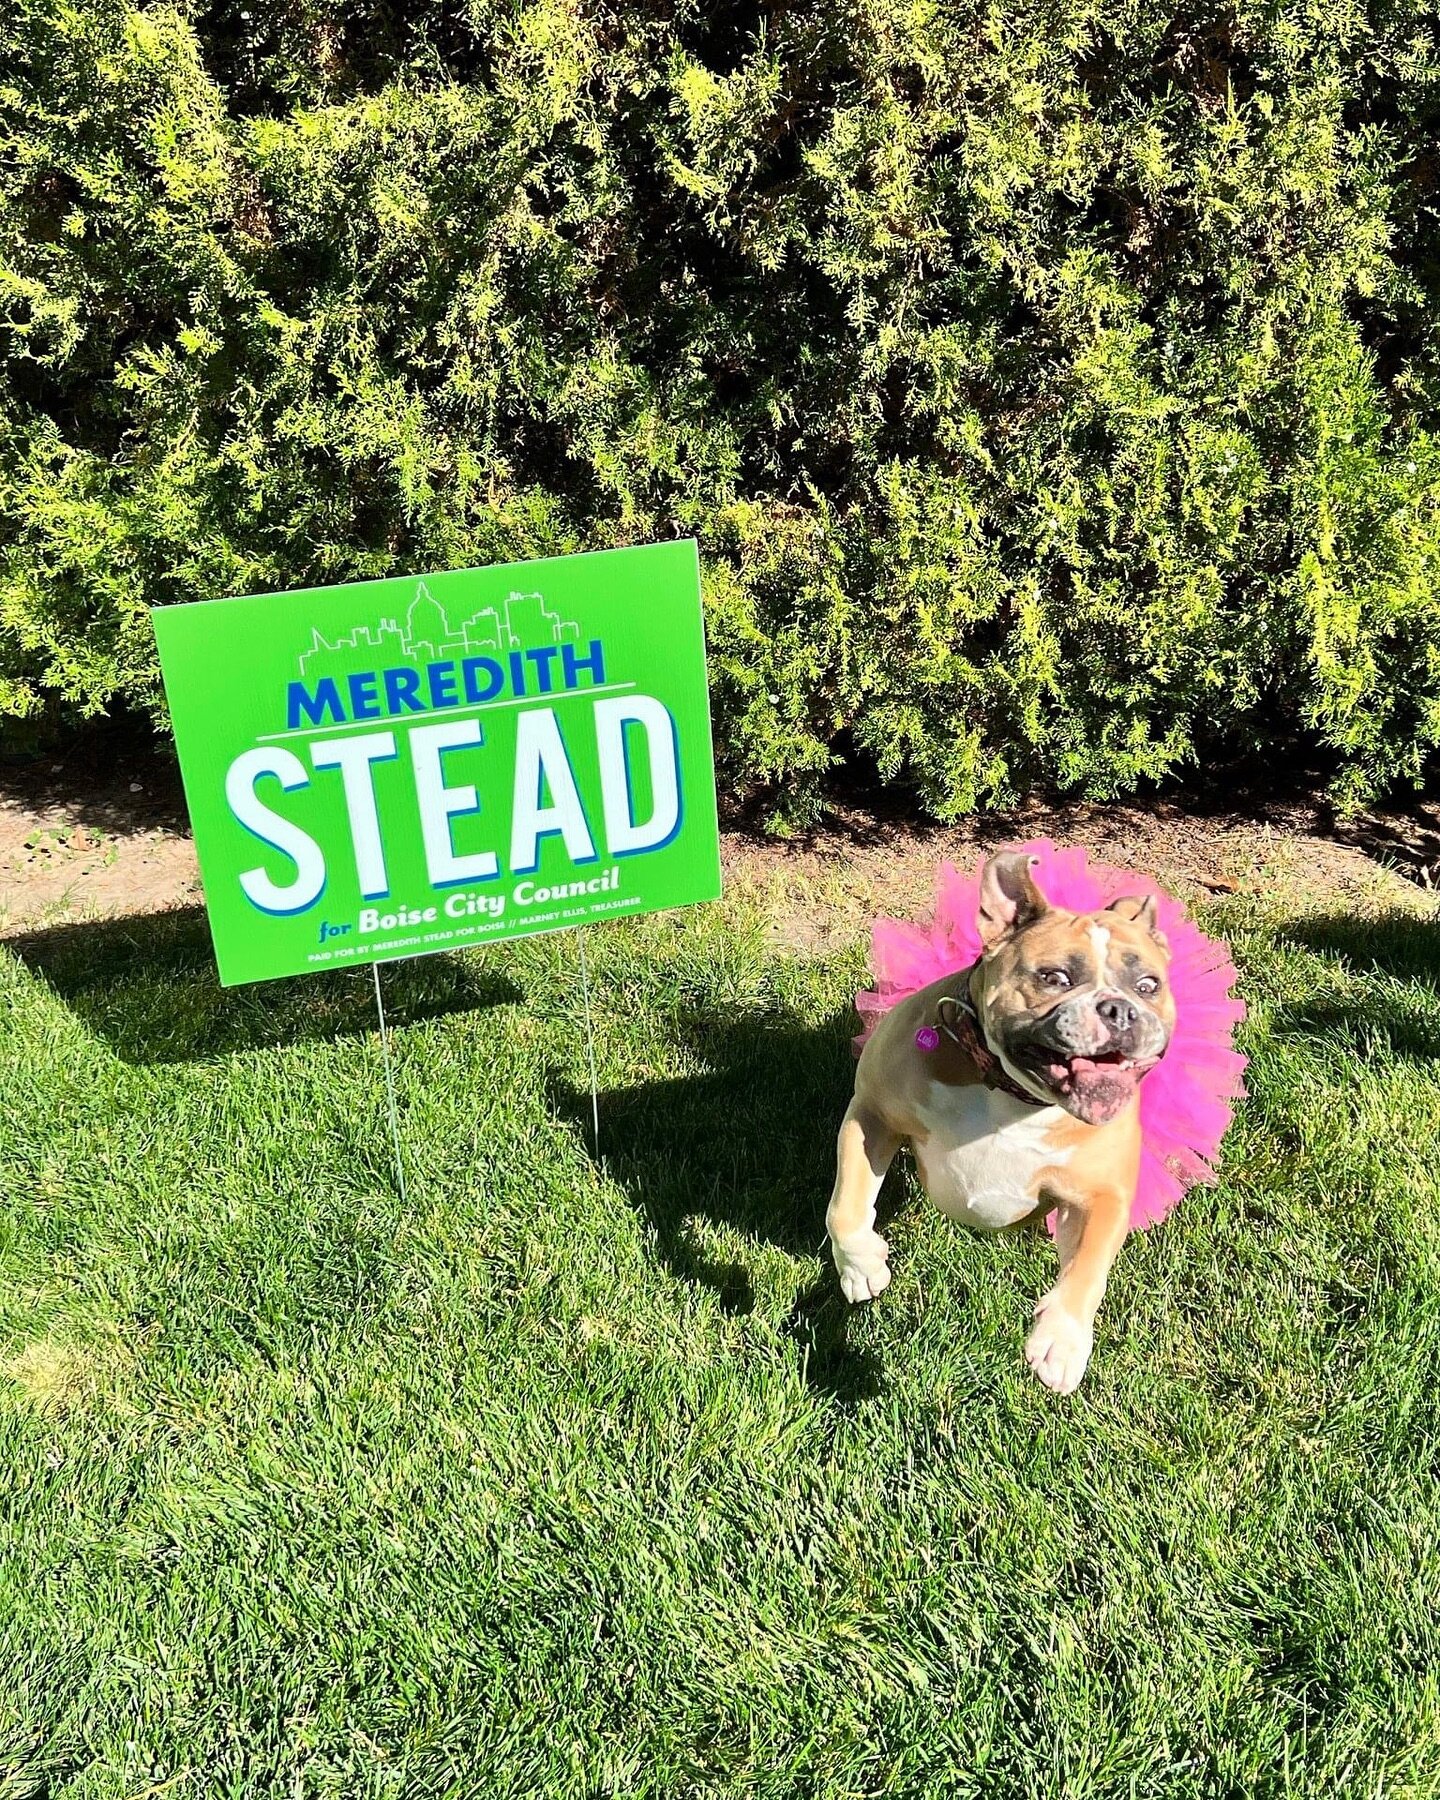 Our crew of volunteers are making their way around, picking up signs. You can help by dropping your Meredith Stead yard sign (or any Meredith Stead sign you see on the side of the road) off at 1348 S. Vista Ave.

Thank you!